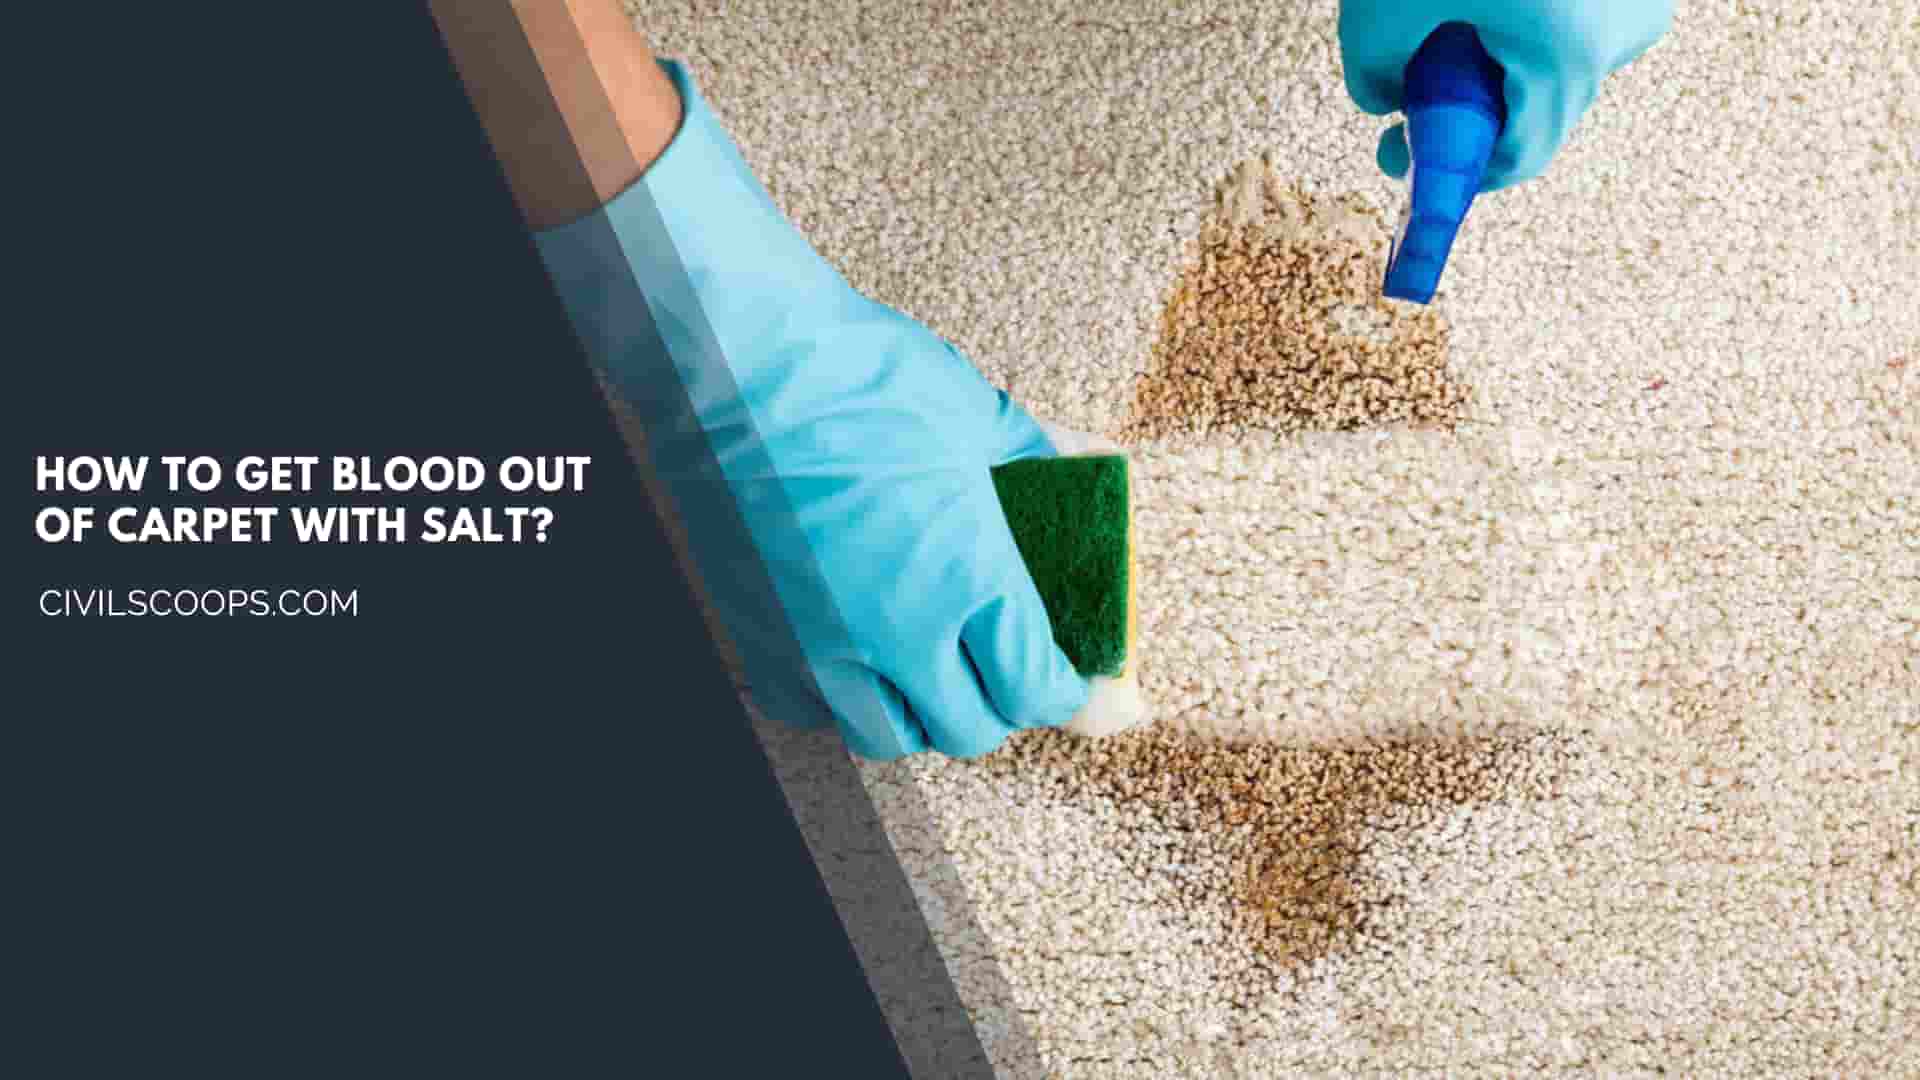 How to Get Blood Out of Carpet with Salt?